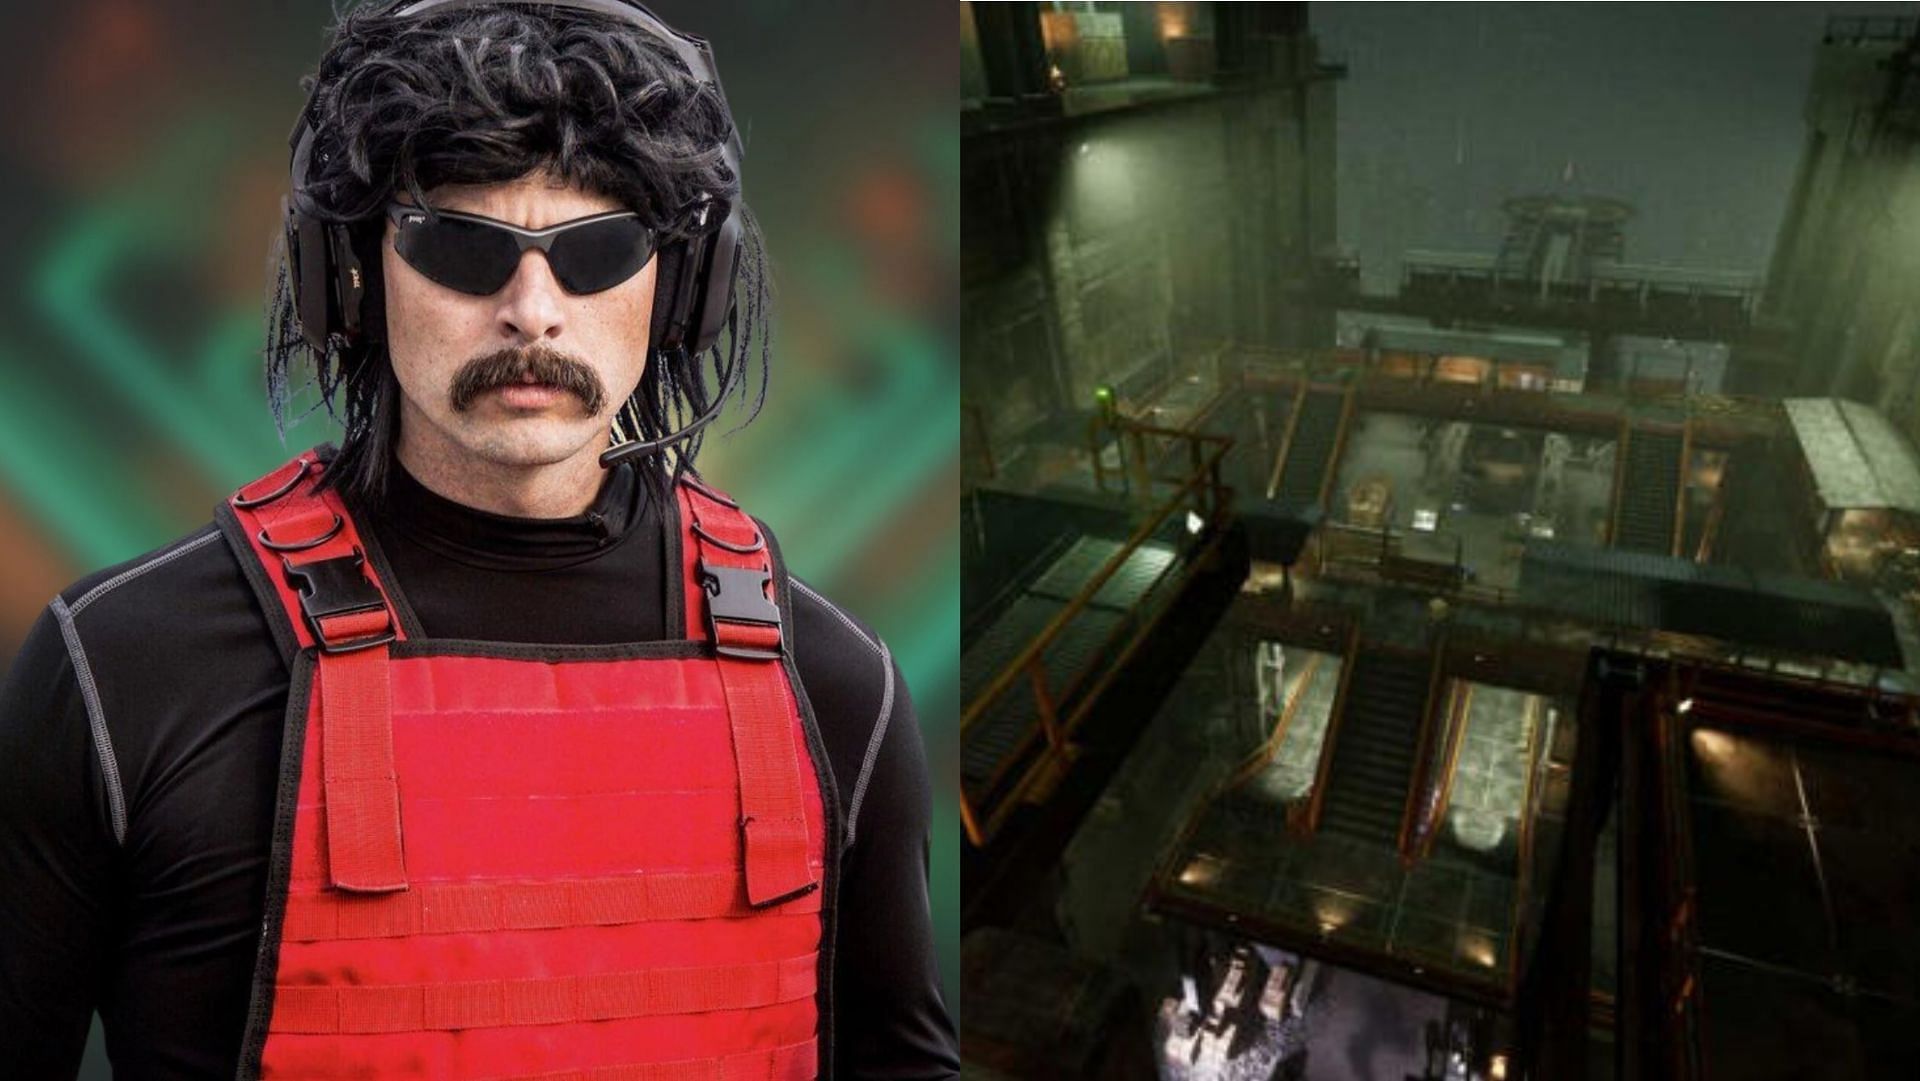 DrDisRespect revealed the first vertical extraction shooter title (Image via Sportskeeda, Midnight Society)